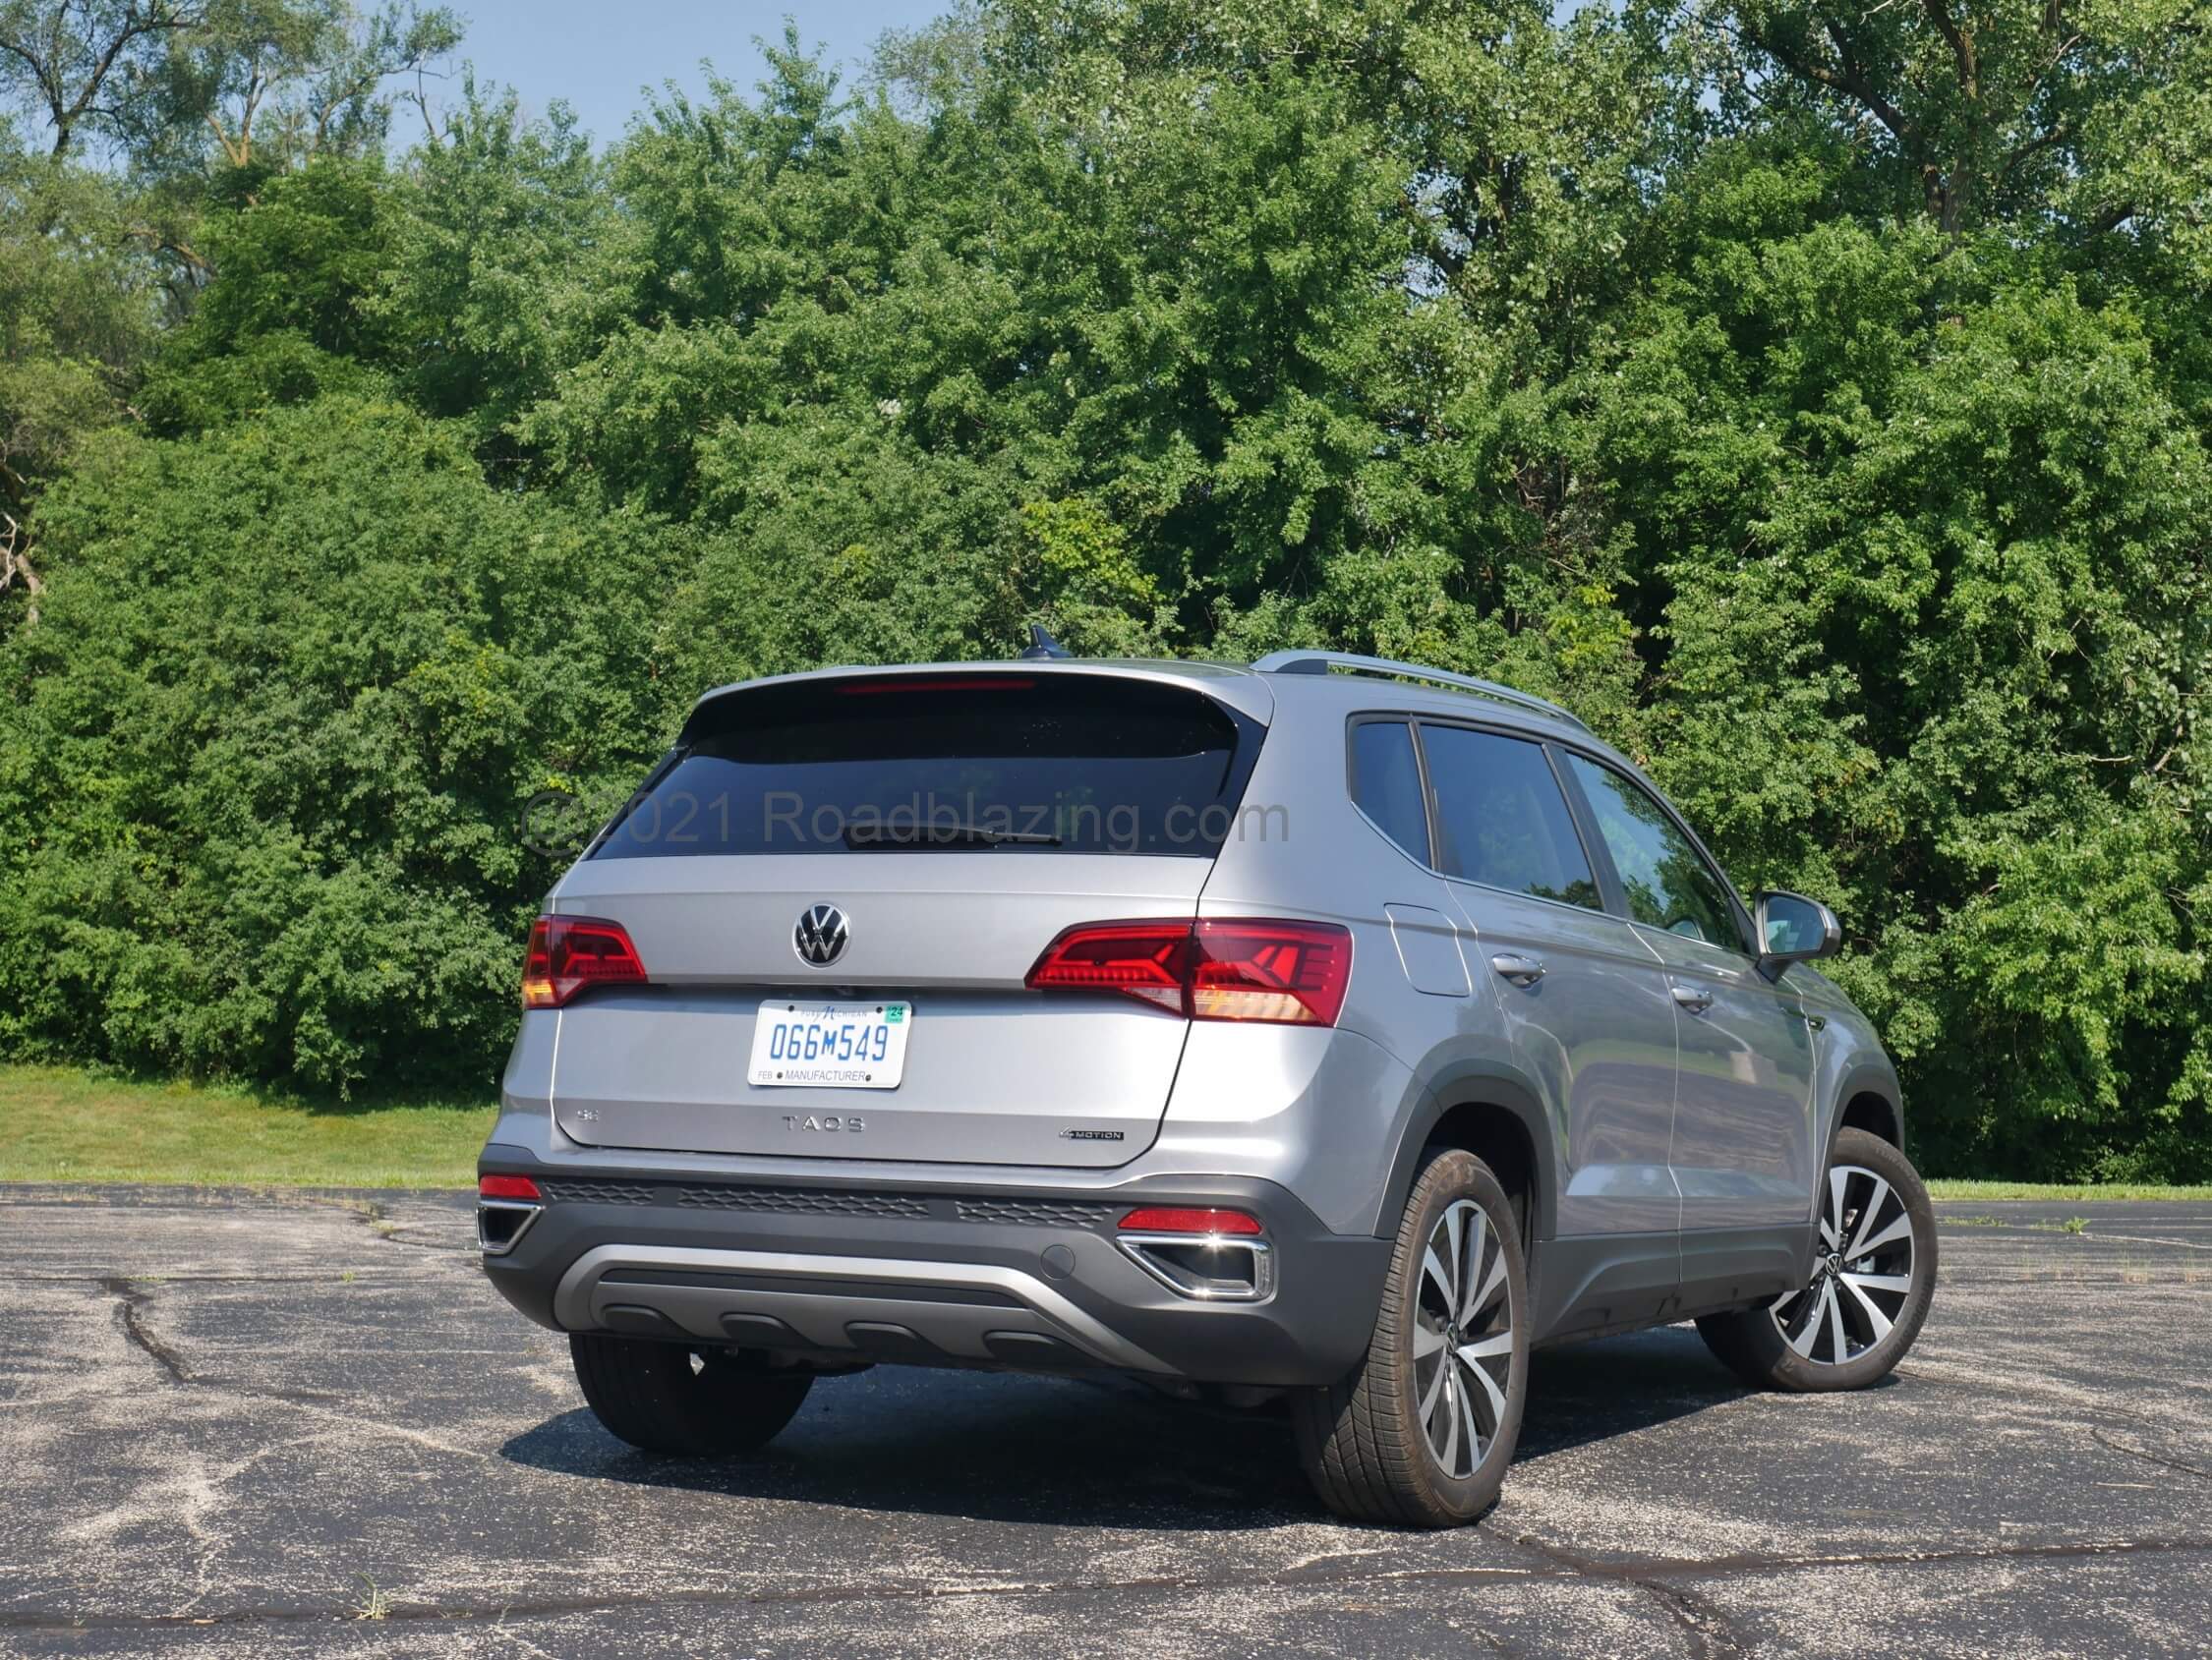 2022 Volkswagen Taos SE 4Motion: dual lower rear corner exhaust outlet bezels are simulated as is the rear metallic skid plate